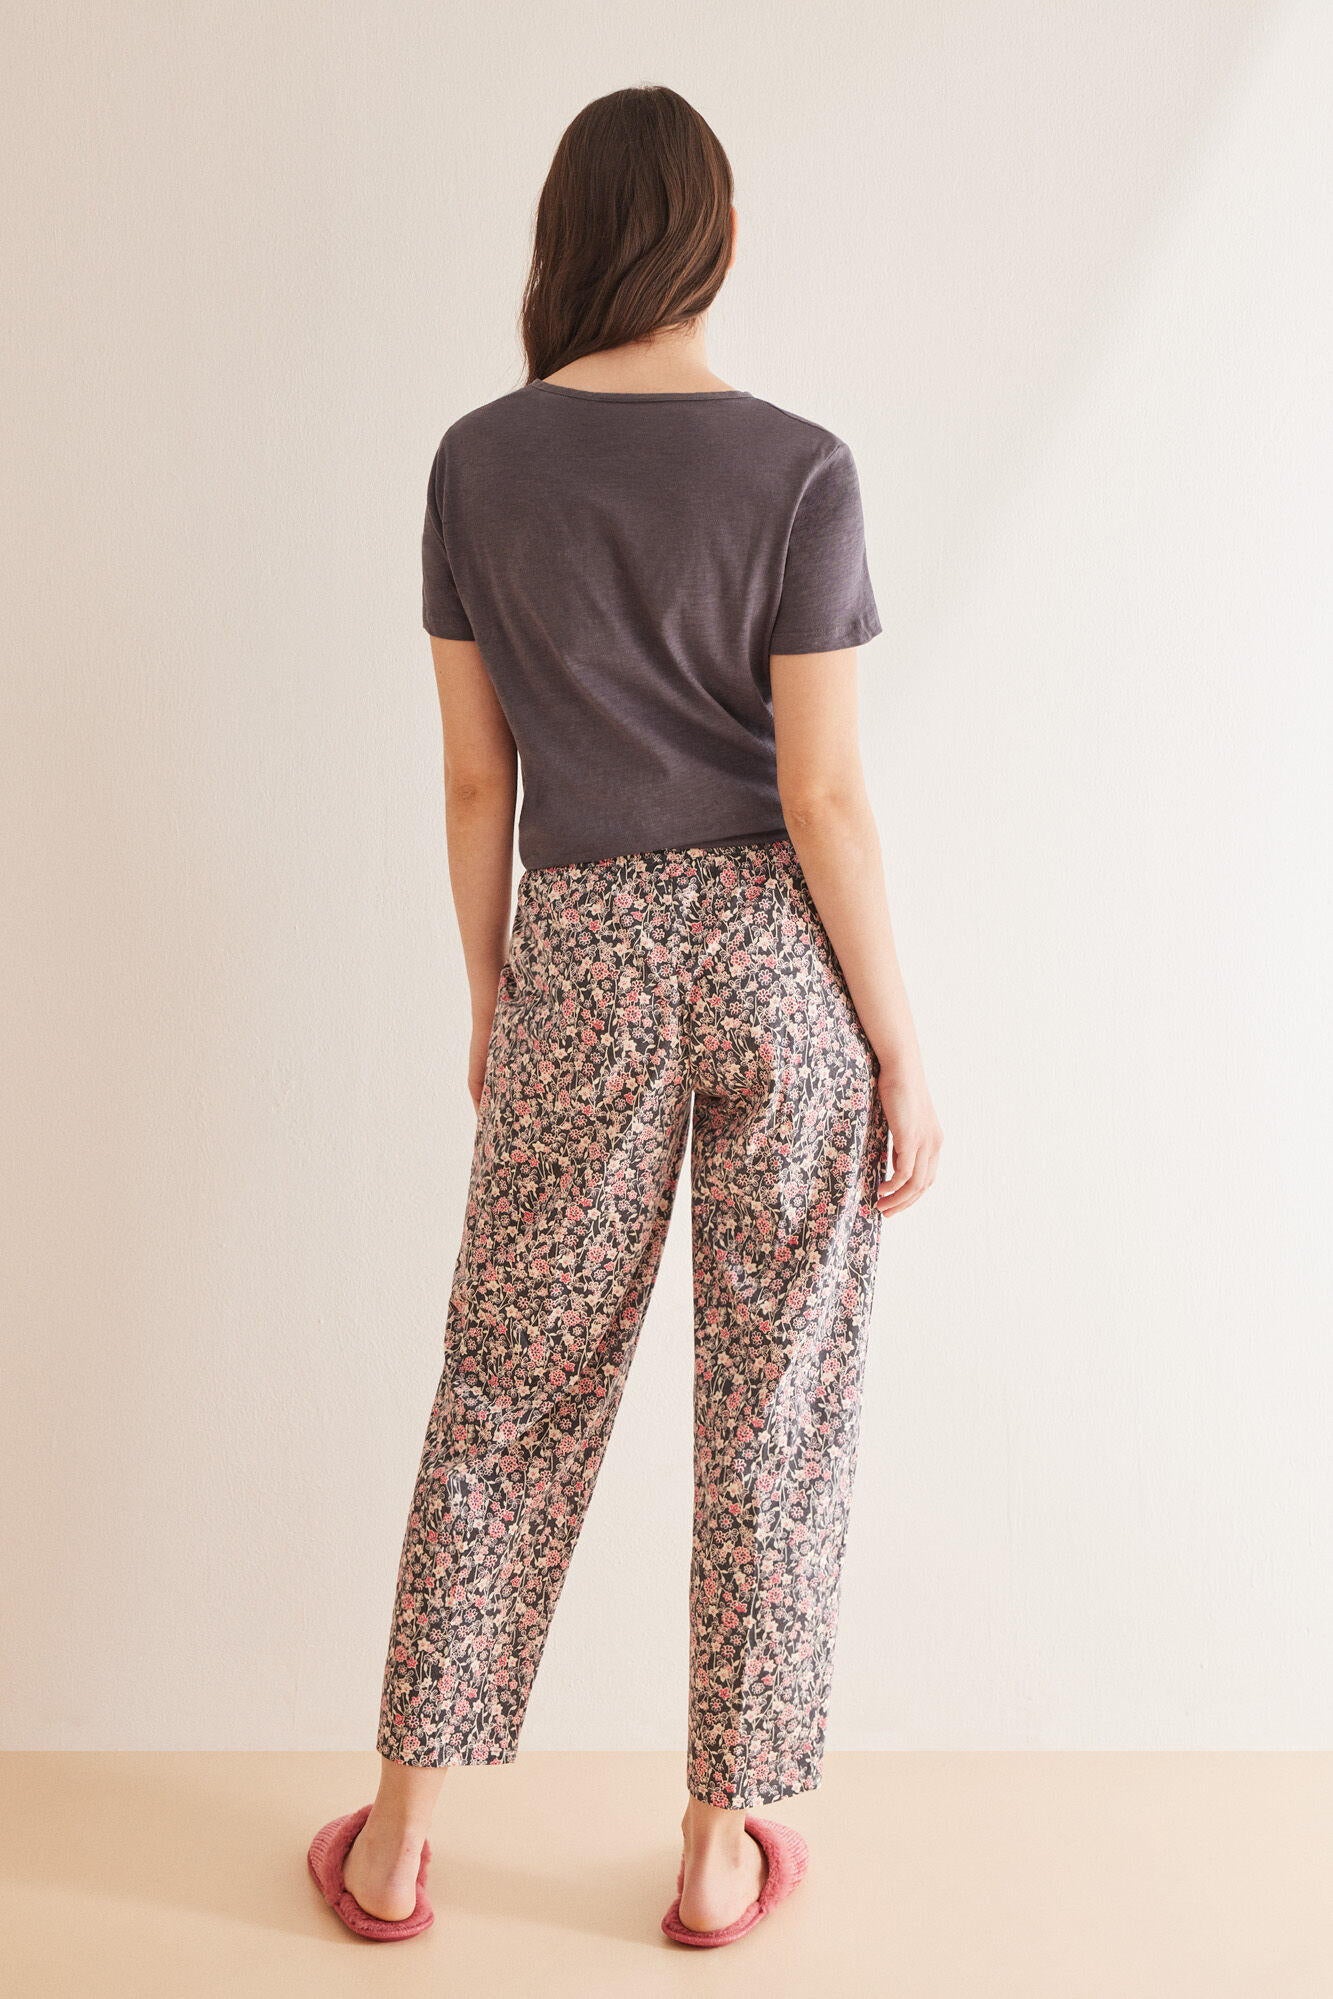 Slip On Lounge Trousers_3707181_49_05